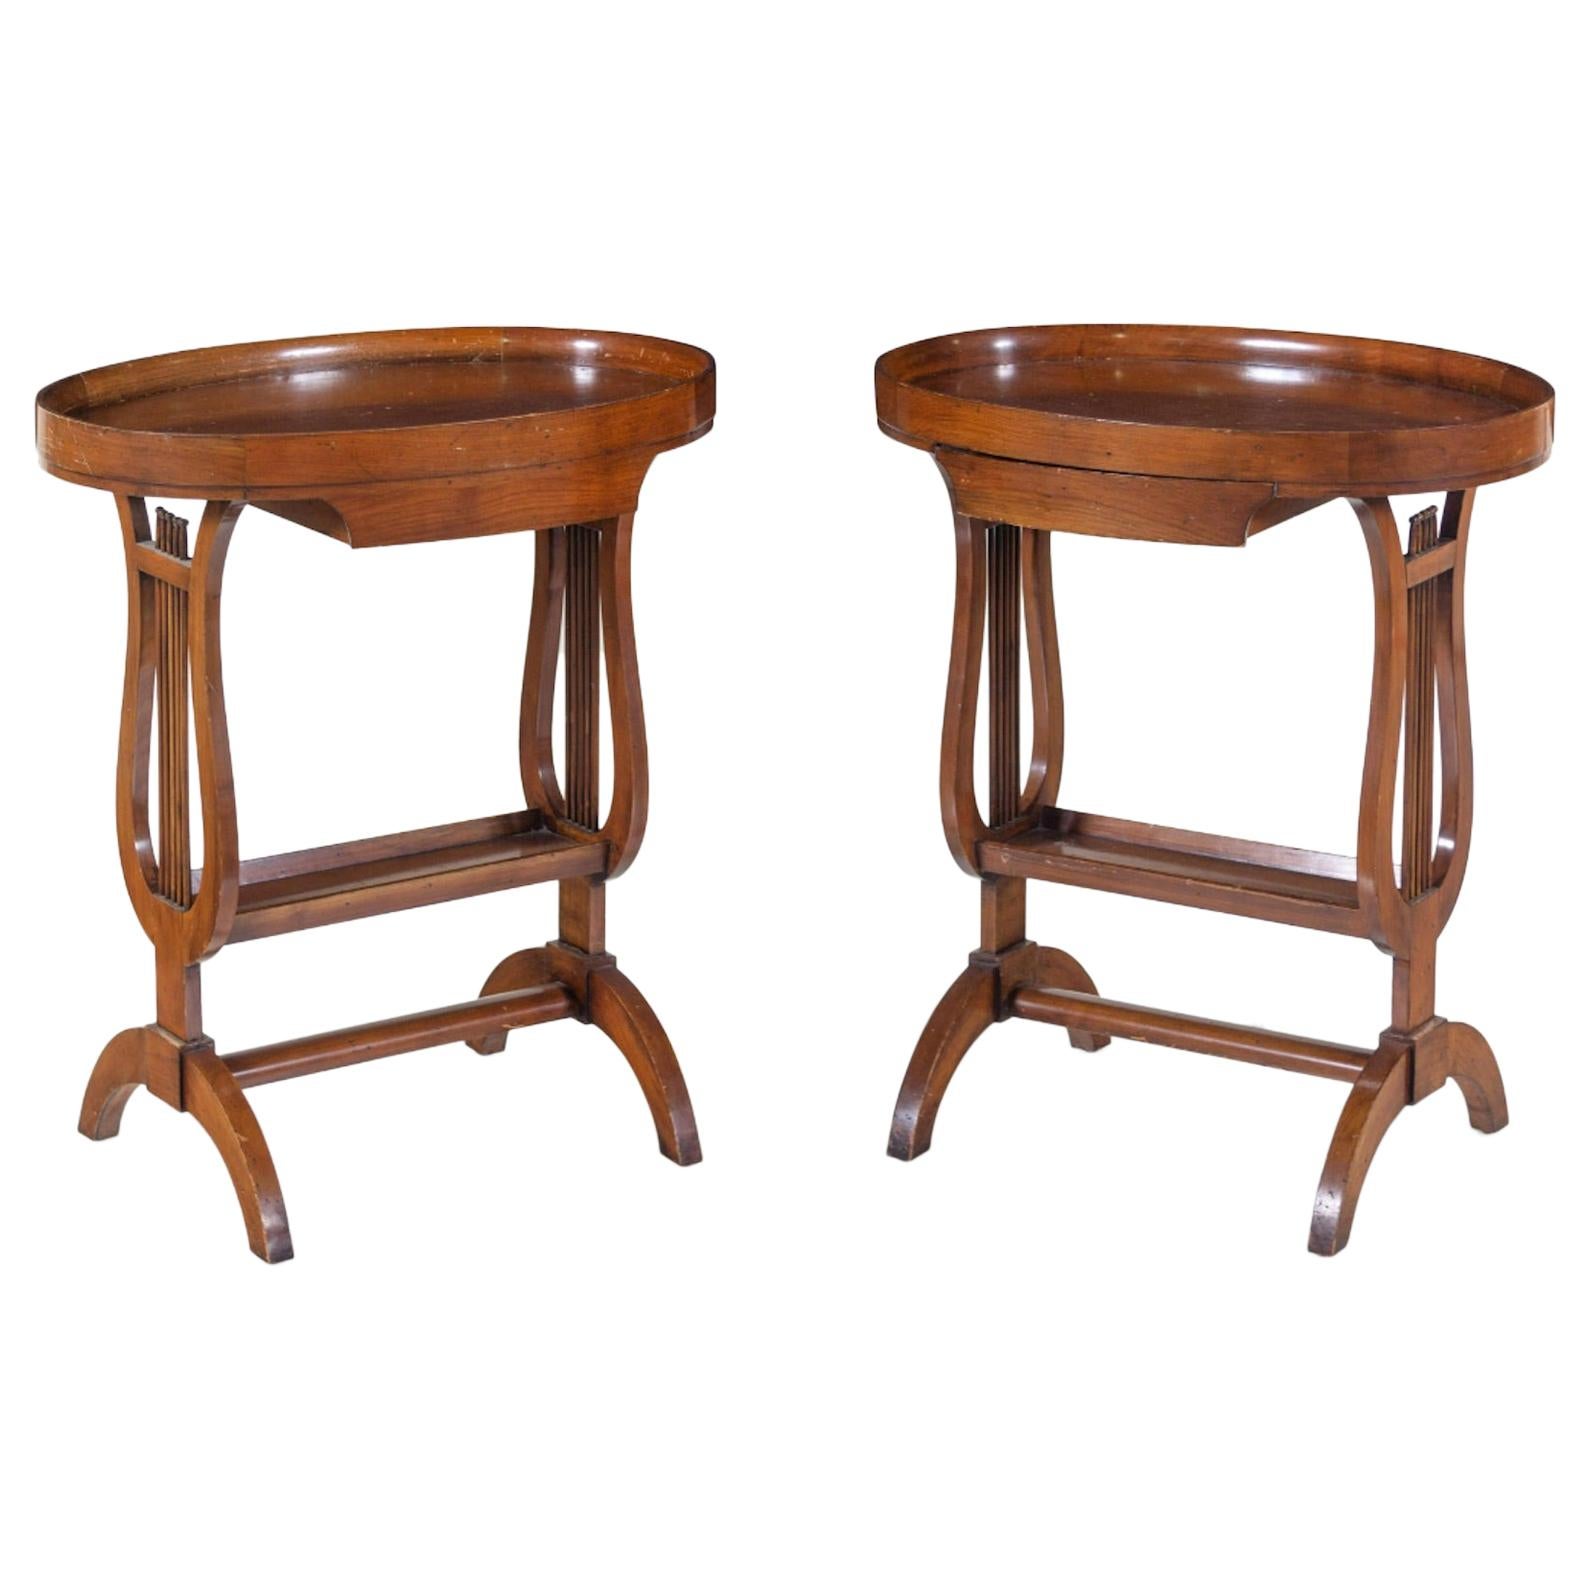 Pair of European Classical Style Cherry Work Tables, Late 19th Century